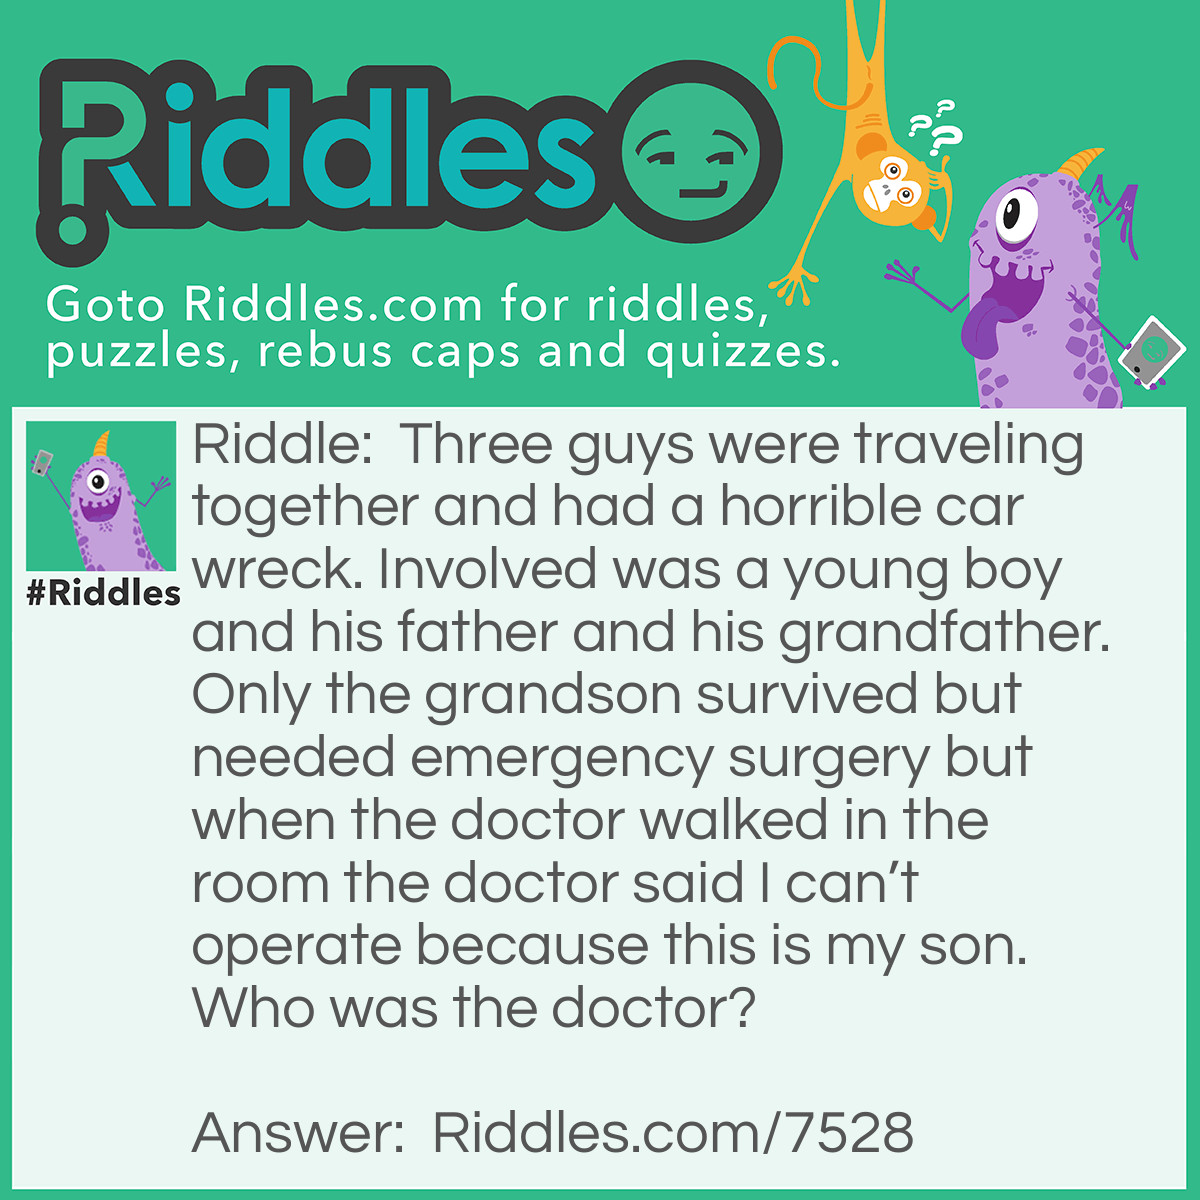 Riddle: Three guys were traveling together and had a horrible car wreck. Involved was a young boy and his father and his grandfather. Only the grandson survived but needed emergency surgery but when the doctor walked in the room the doctor said I can't operate because this is my son. Who was the doctor? Answer: The mother was the doctor.